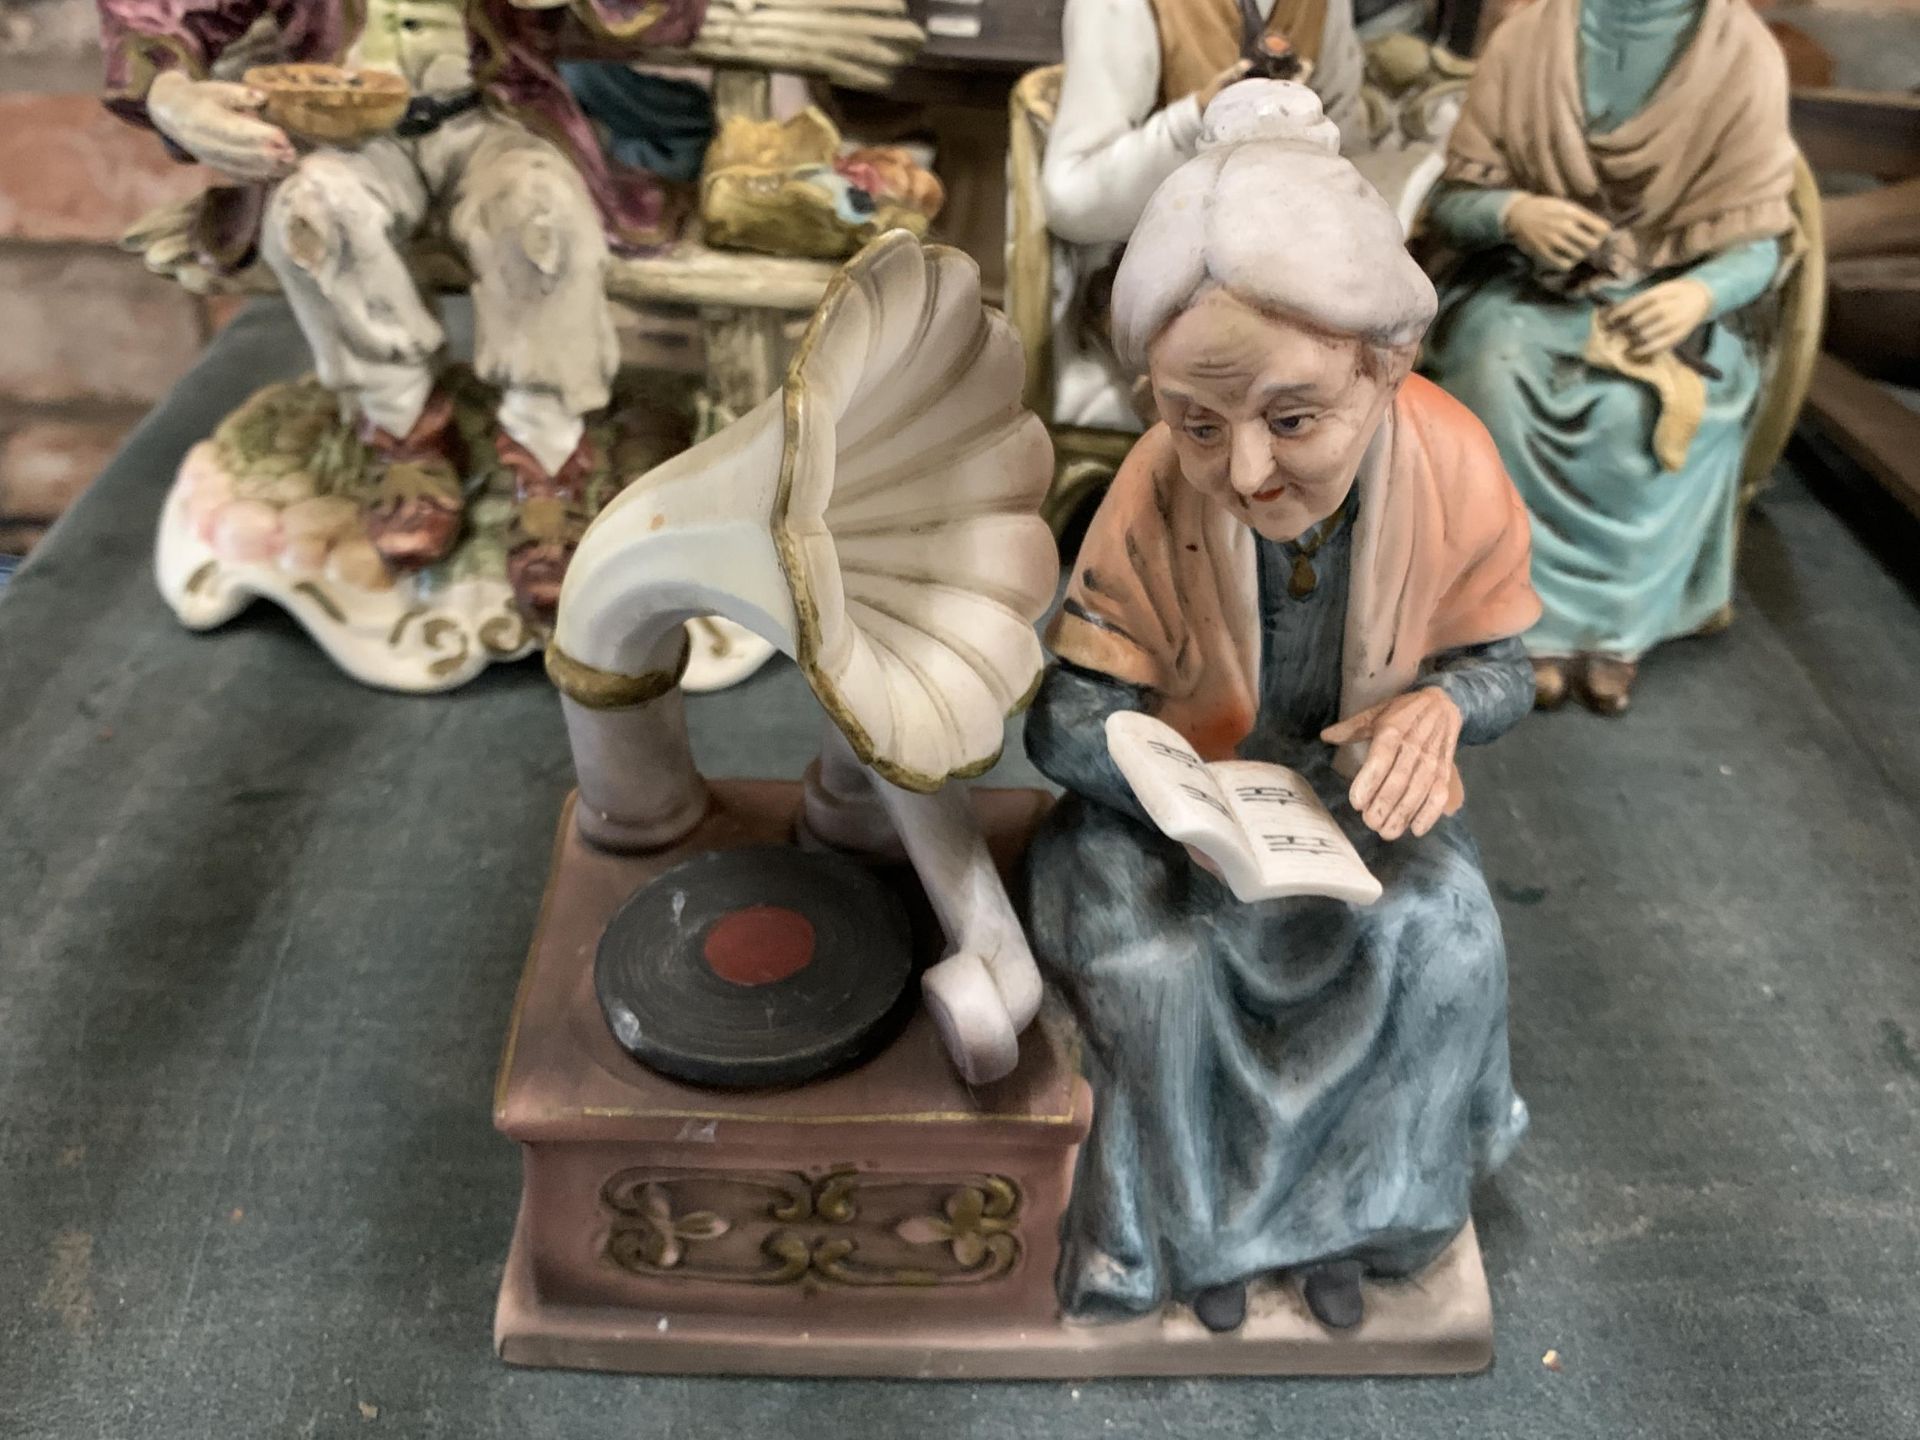 SIX CHALKWARE FIGURINES FEATURING A COUPLE PLAYING CARD GAMES, LADY WITH DONKEY AND CART ETC - Bild 2 aus 4